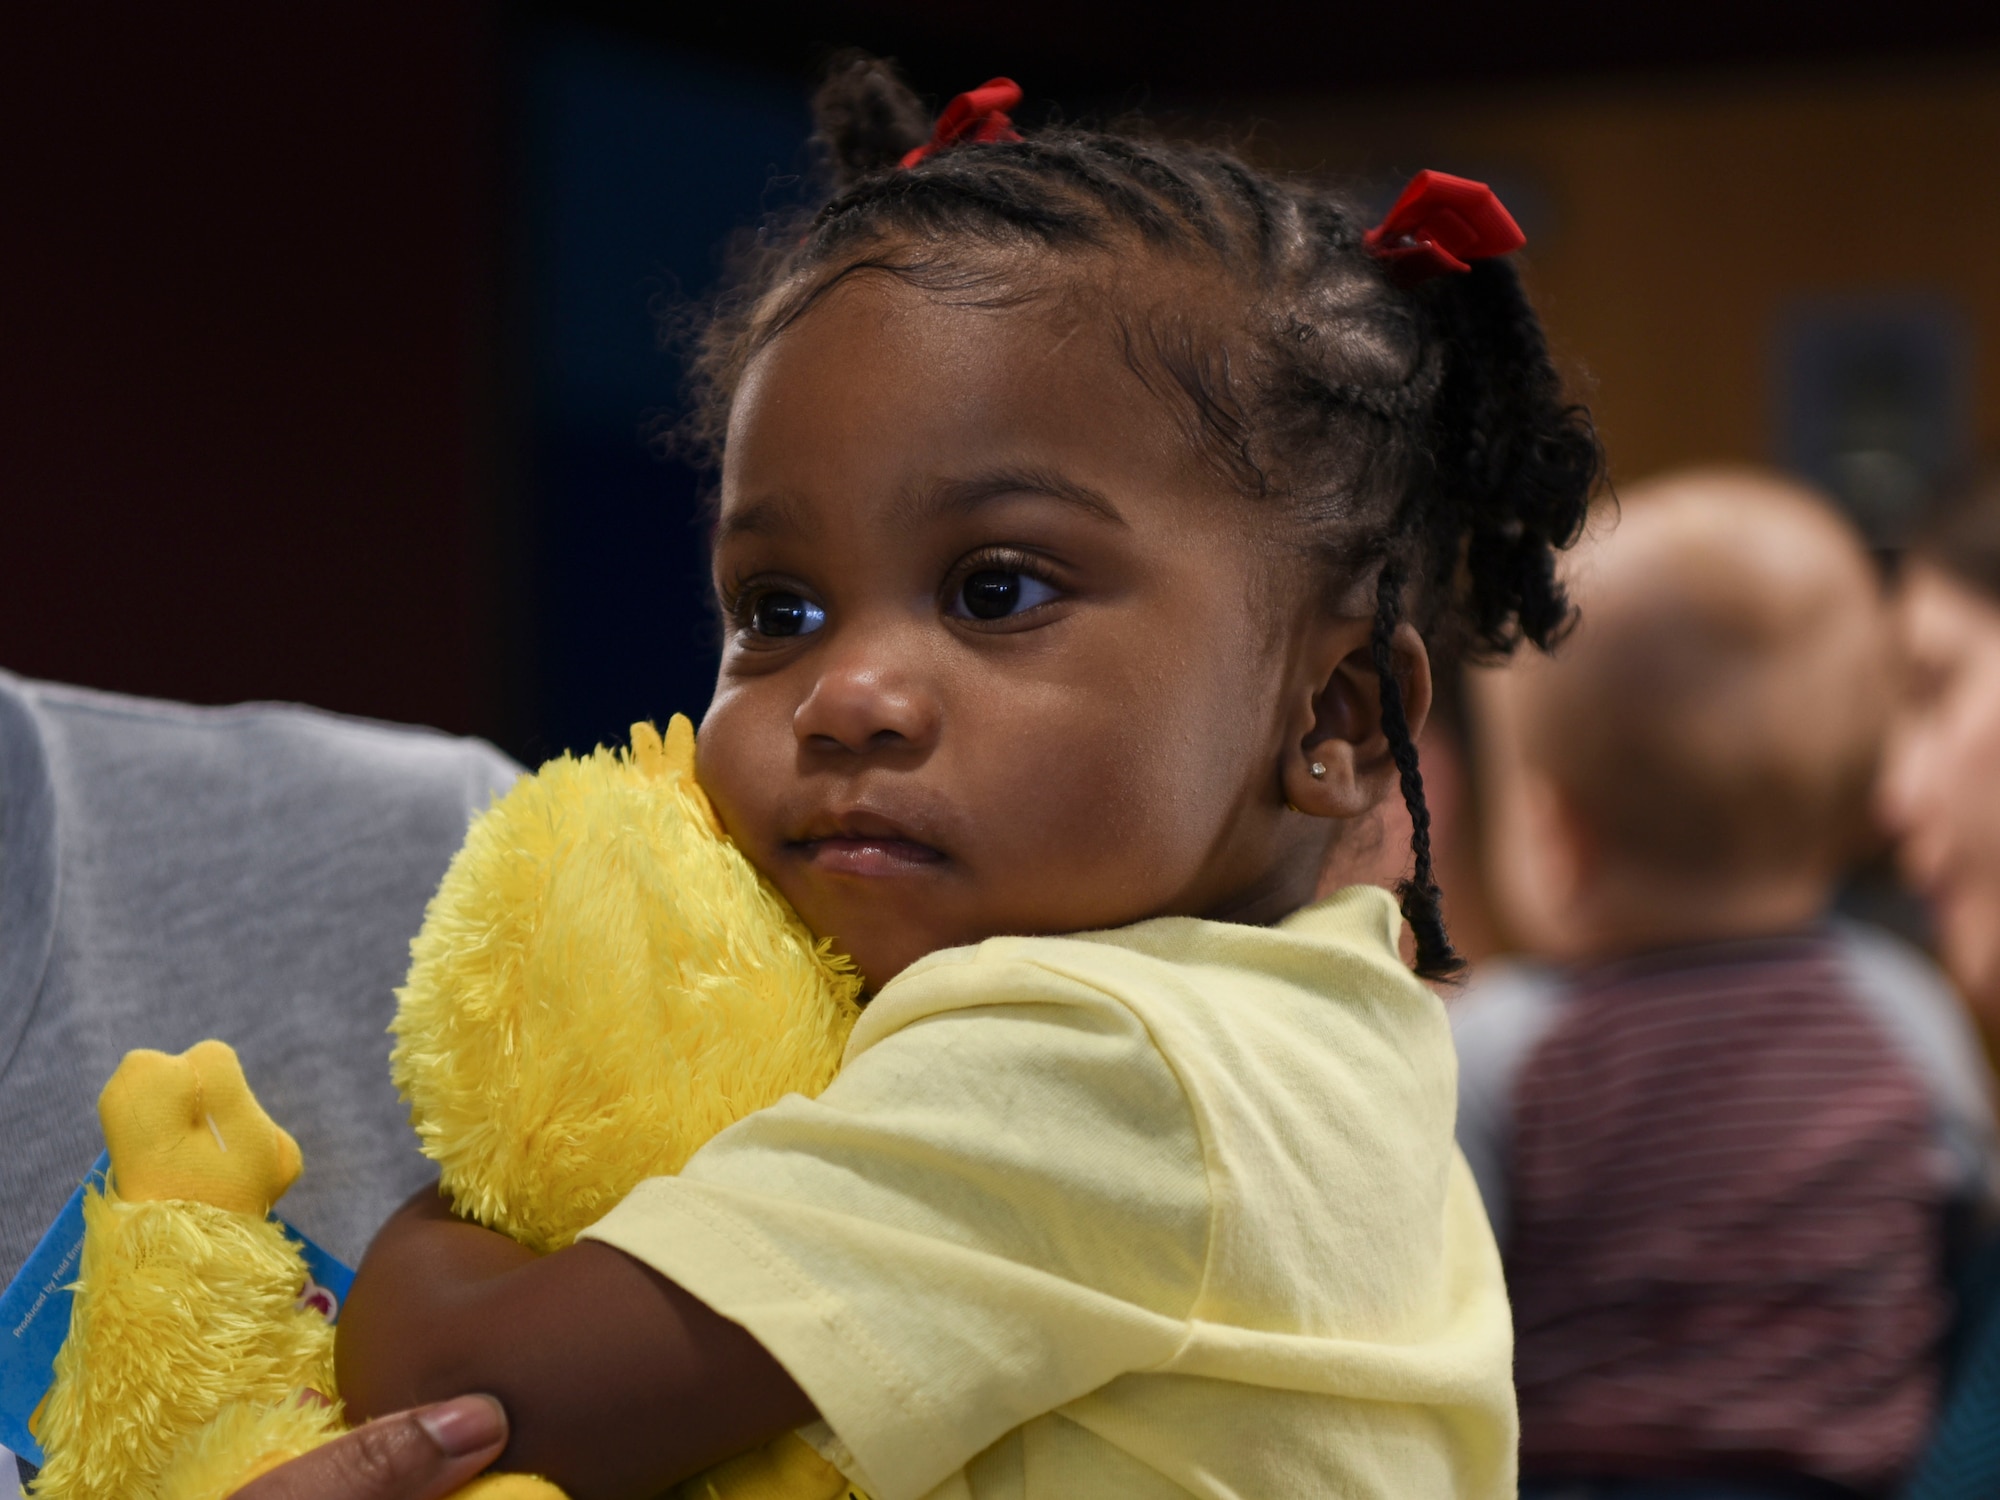 Bailey Lawson, 1, holds a Big Bird at the Sesame Street Live performance event on March 26, 2019, on Grand Forks Air Force Base, North Dakota. Lawson was one of the many children waiting in line for the Sesame Street Live performance, and chose the Big Bird plush toy as her souvenir from the show. (U.S. Air Force photo by Airman 1st Class Melody Wolff)